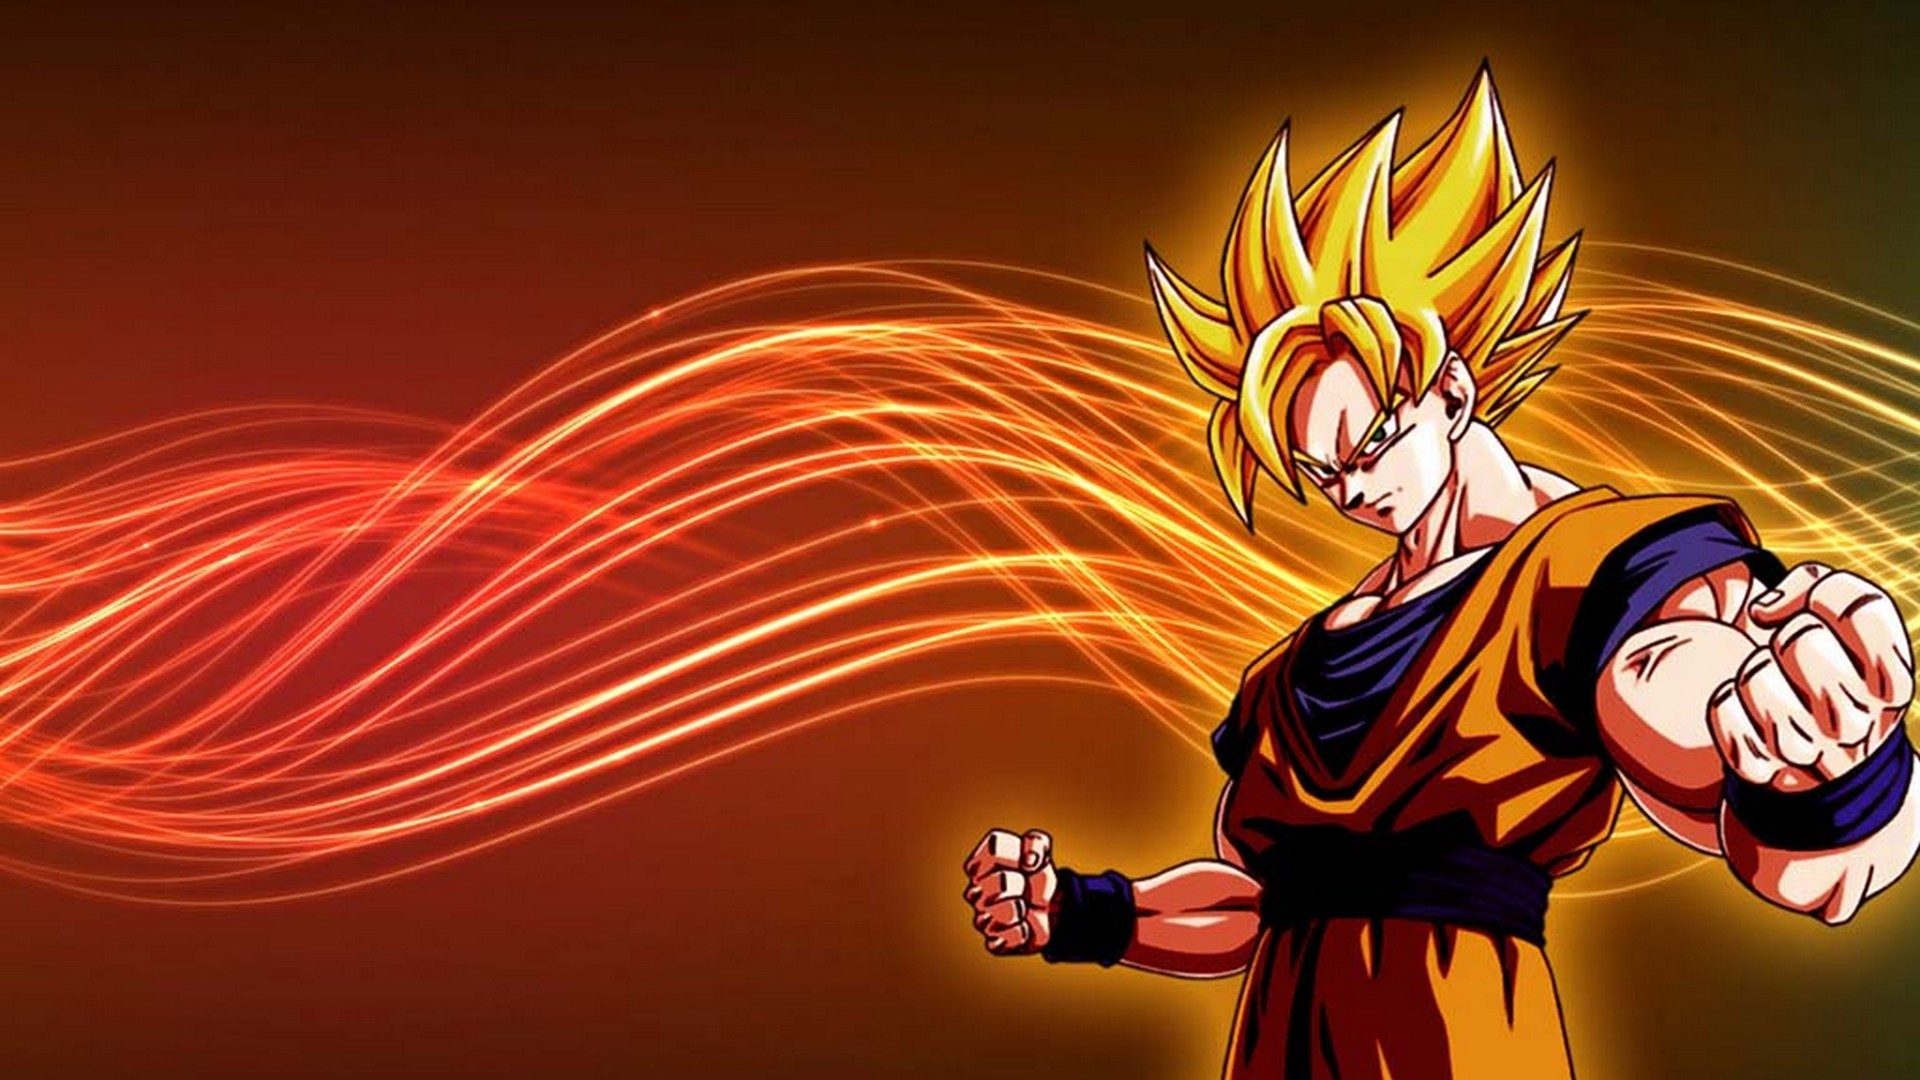 Goku Super Saiyan Desktop Backgrounds with image resolution 1920x1080 pixel. You can make this wallpaper for your Desktop Computer Backgrounds, Mac Wallpapers, Android Lock screen or iPhone Screensavers